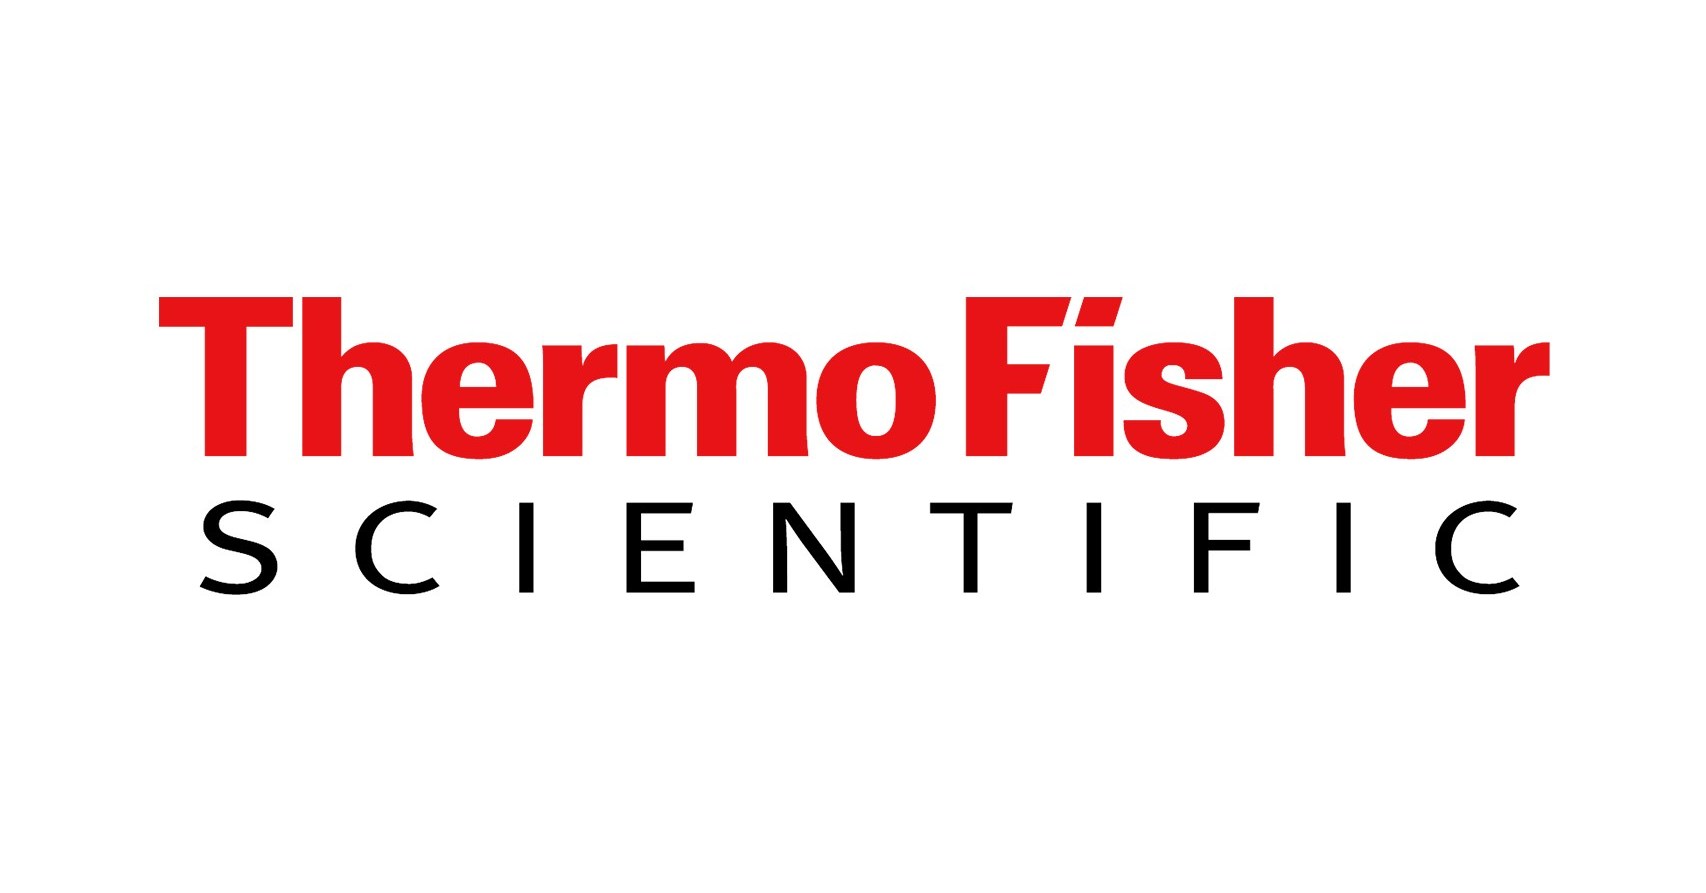 Thermo Fisher Scientific Selects Mebane, N.C. as Site for New Manufacturing  Facility